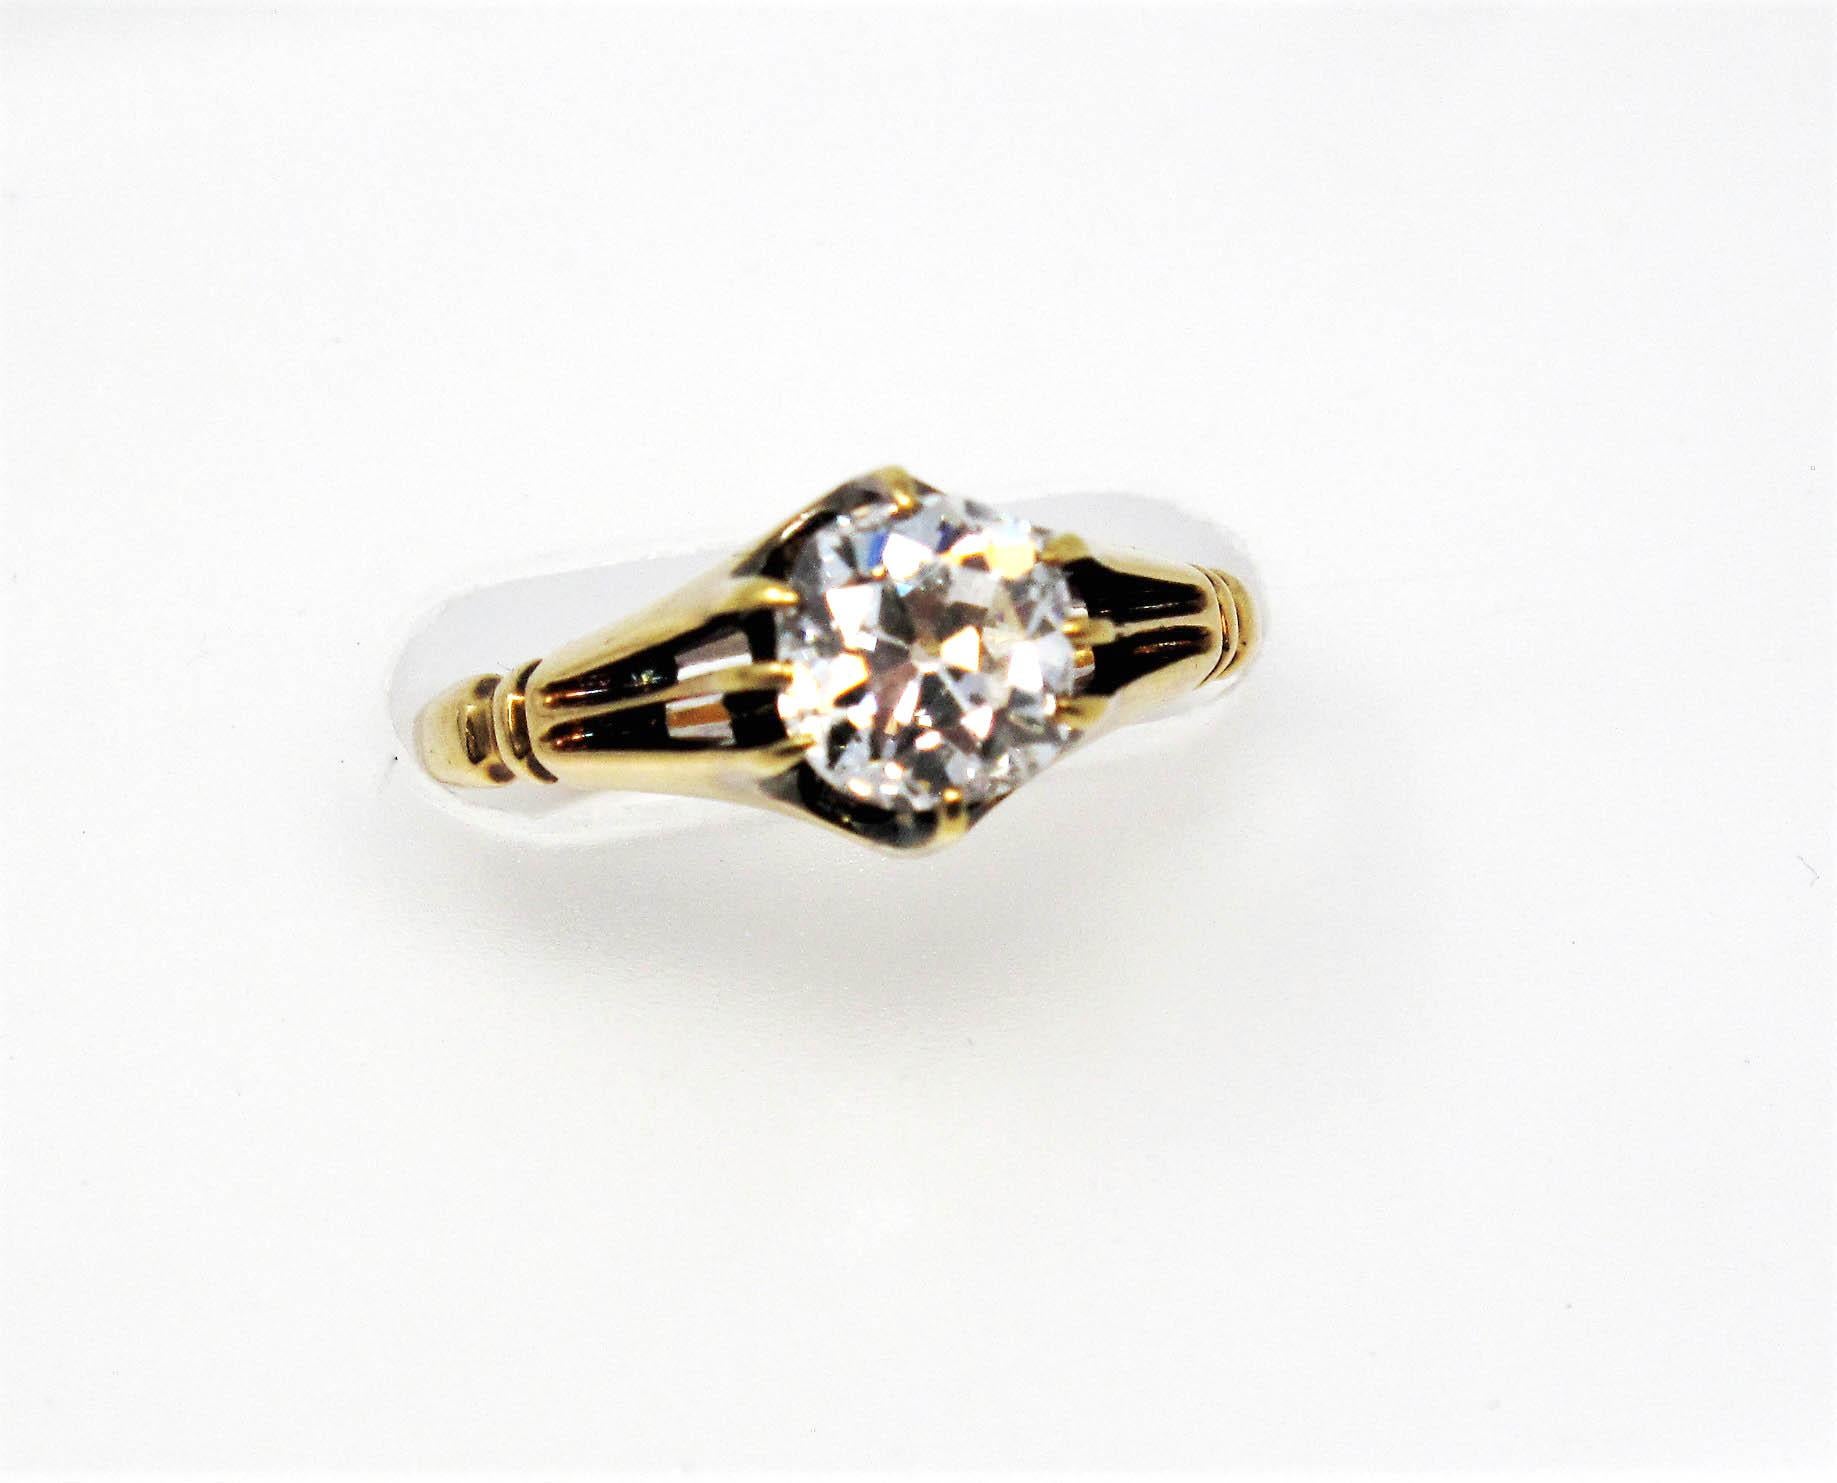 Antique 1.40 Carat Old Mine Cut Diamond Solitaire 18 Karat Yellow Gold Ring For Sale 5